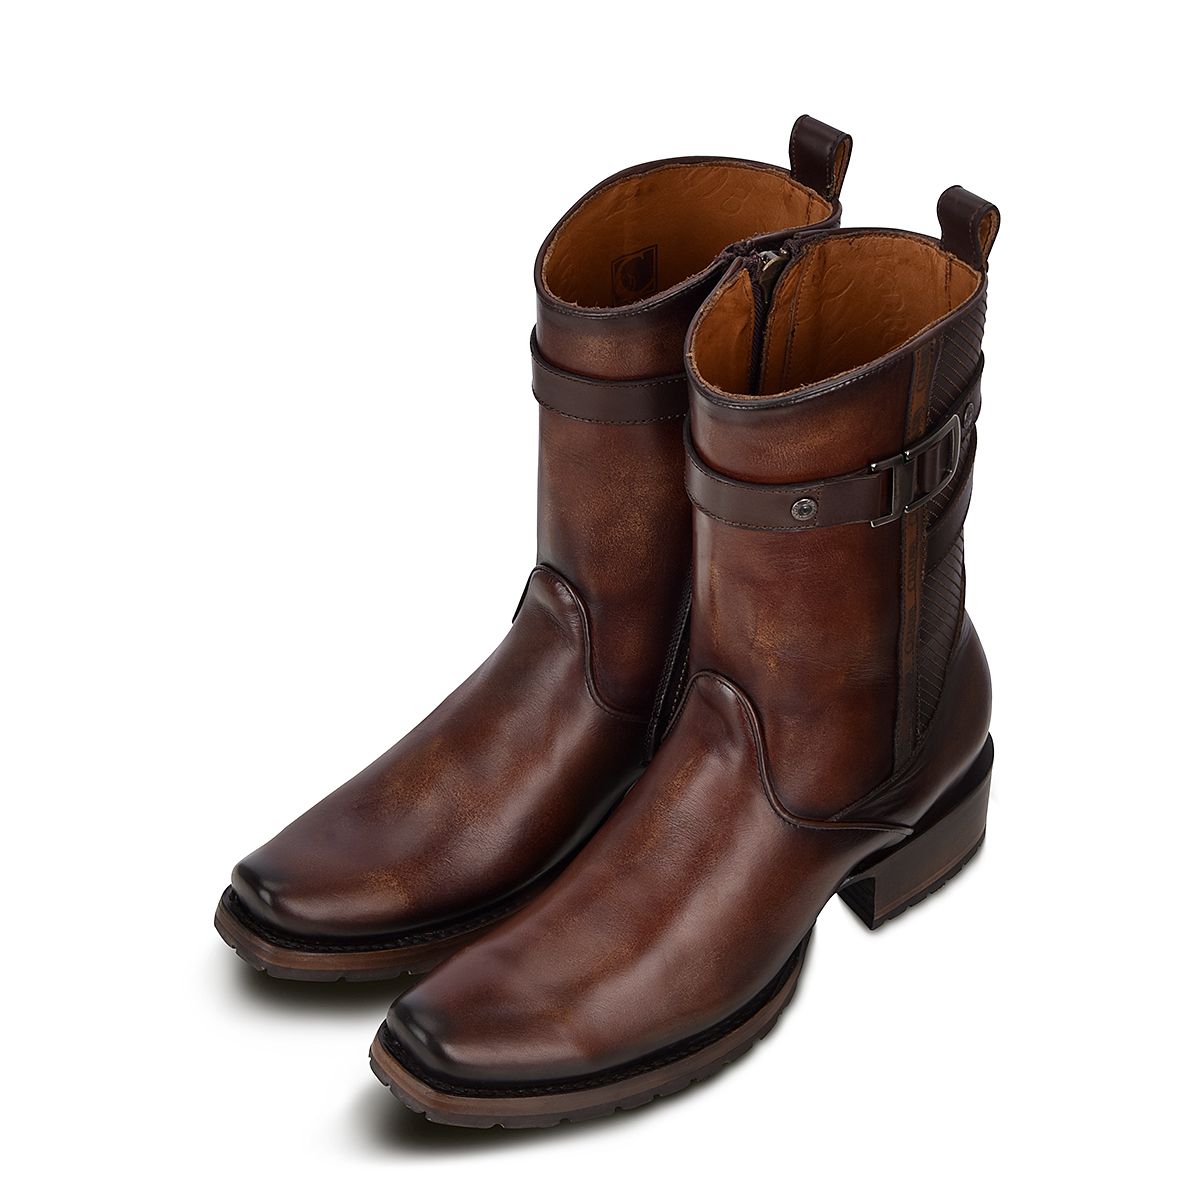 1J2JRS - Cuadra brown casual cowboy genuine cowhide leather boots for men-Kuet.us